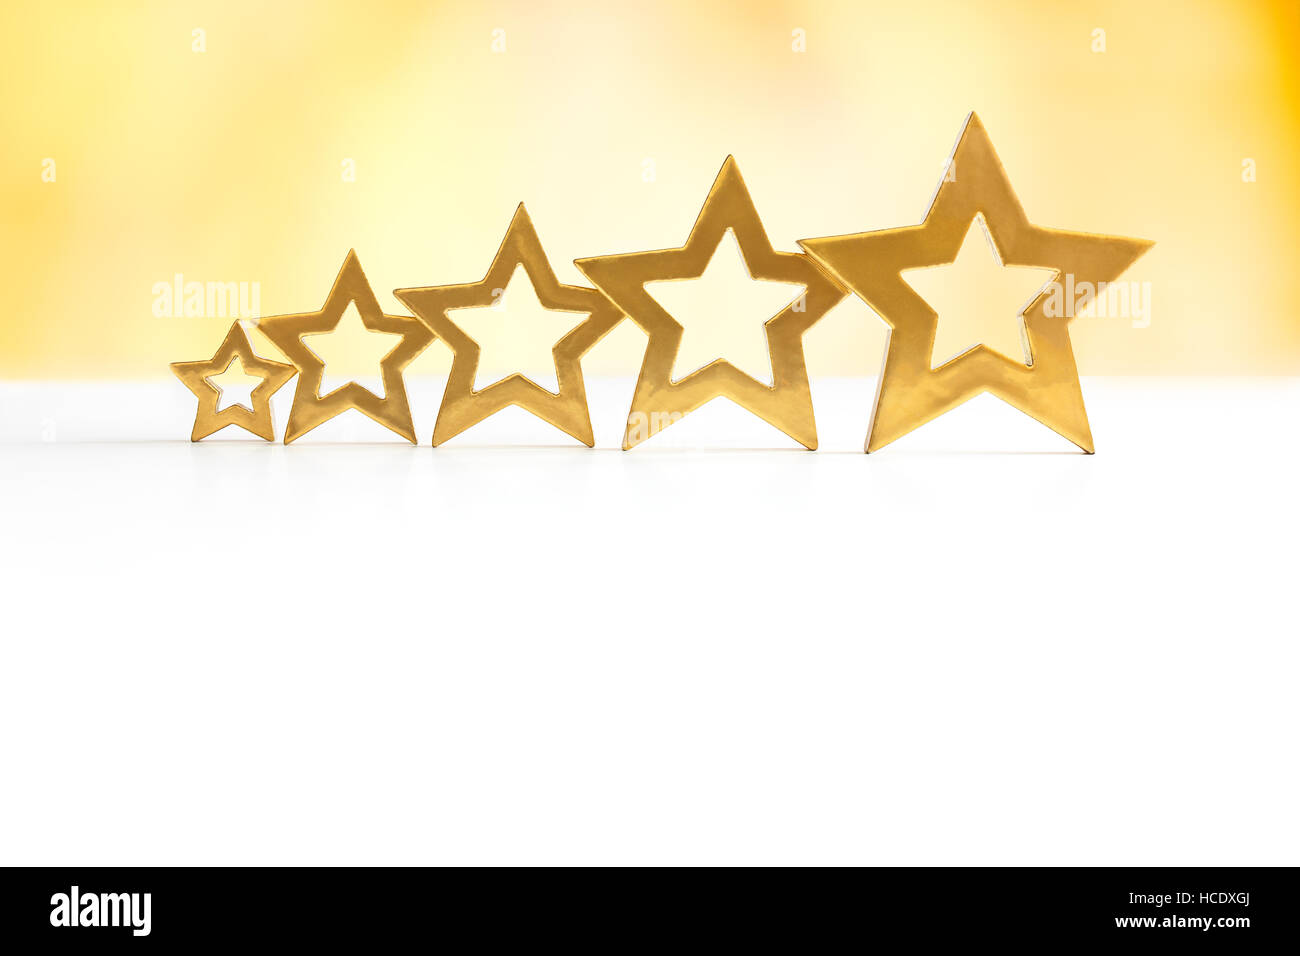 Five golden shining stars in ascending order on white and yellow background, copy  or text space, sign for perfect service Stock Photo